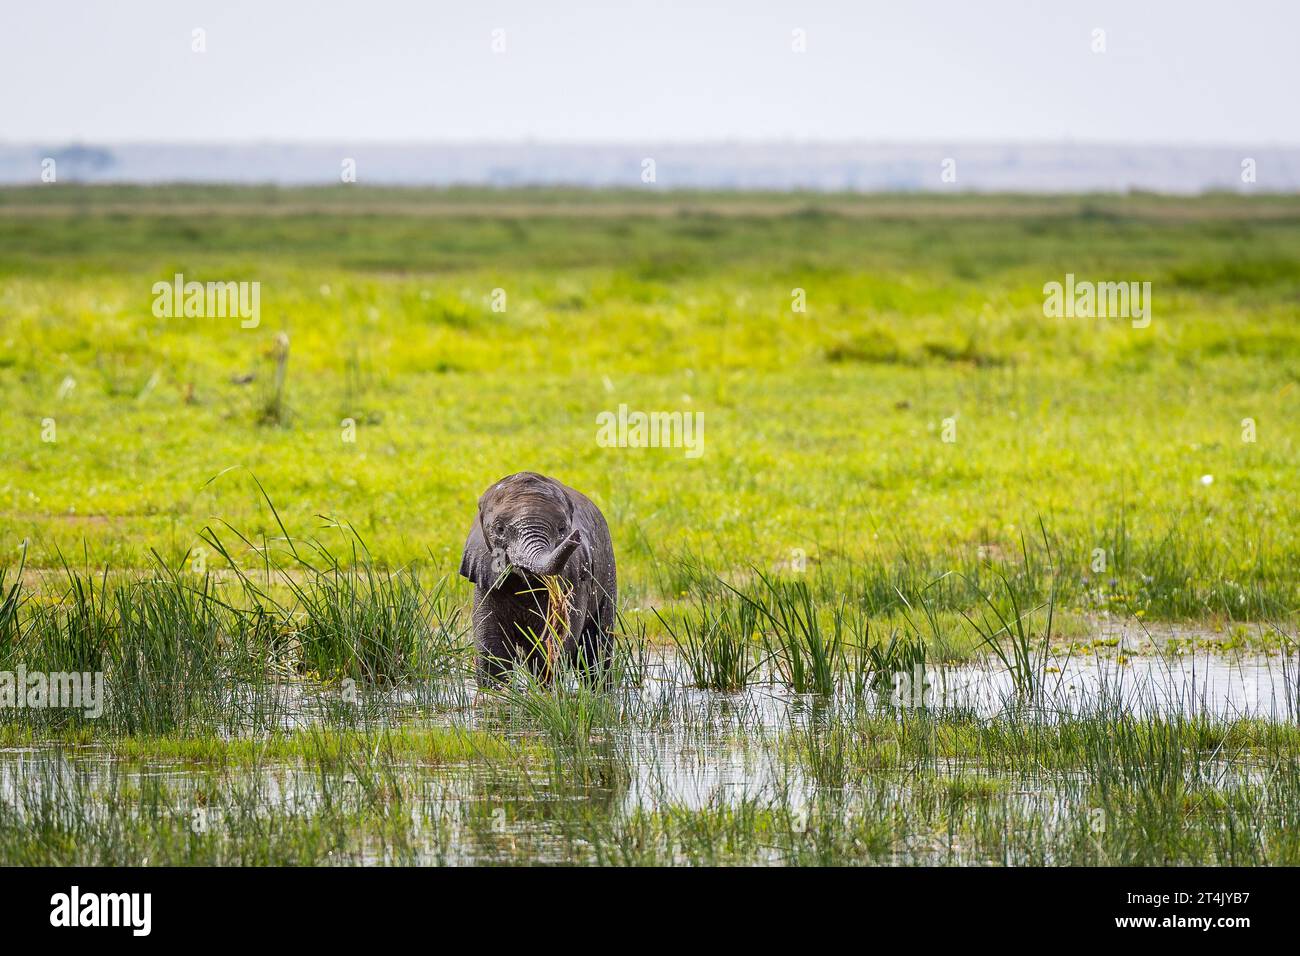 An Elephant calf standing in water and green grass plays with it's trunk Stock Photo